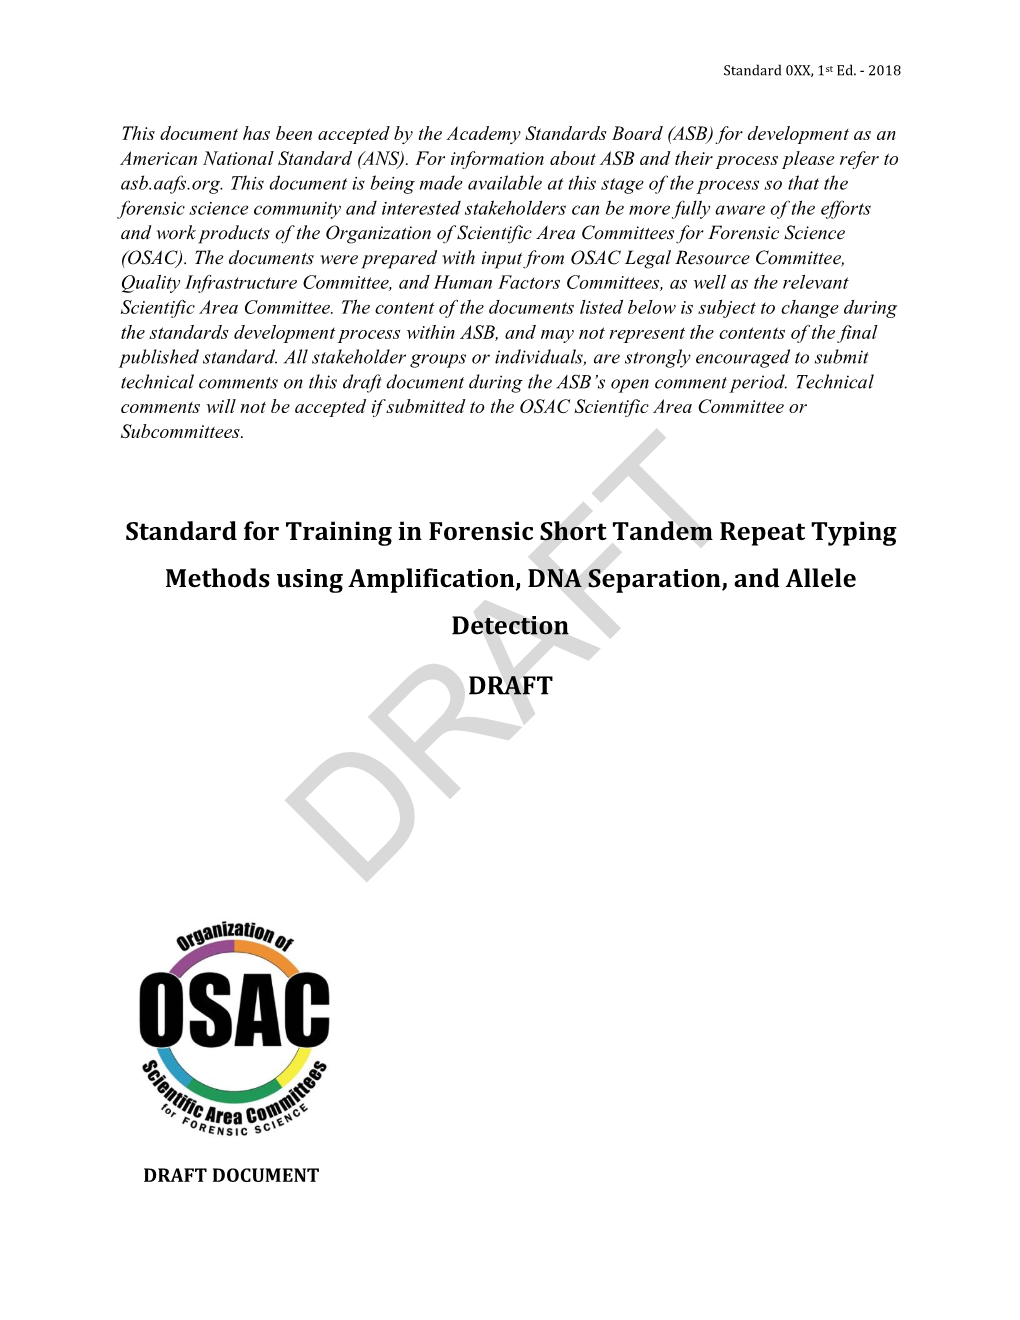 Standard for Training in Forensic Short Tandem Repeat Typing Methods Using Amplification, DNA Separation, and Allele Detection